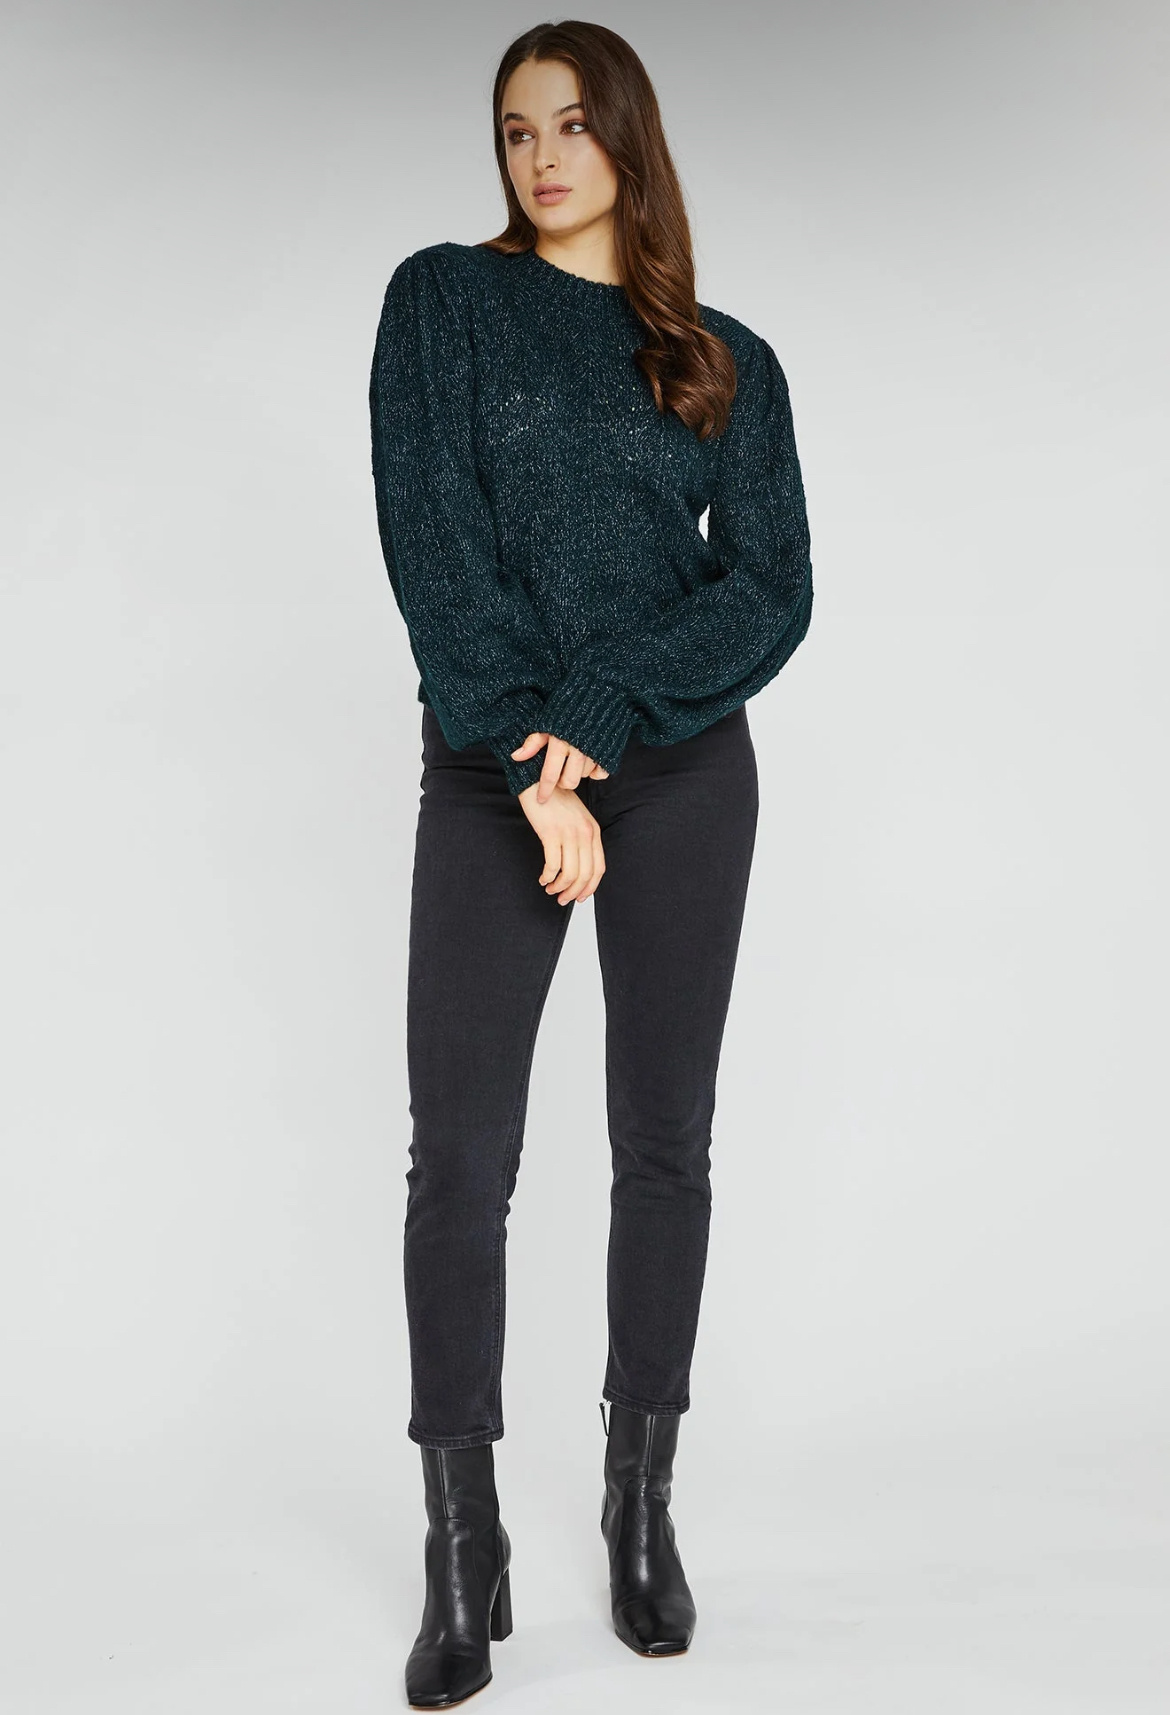 Gentle Fawn Livia Pullover